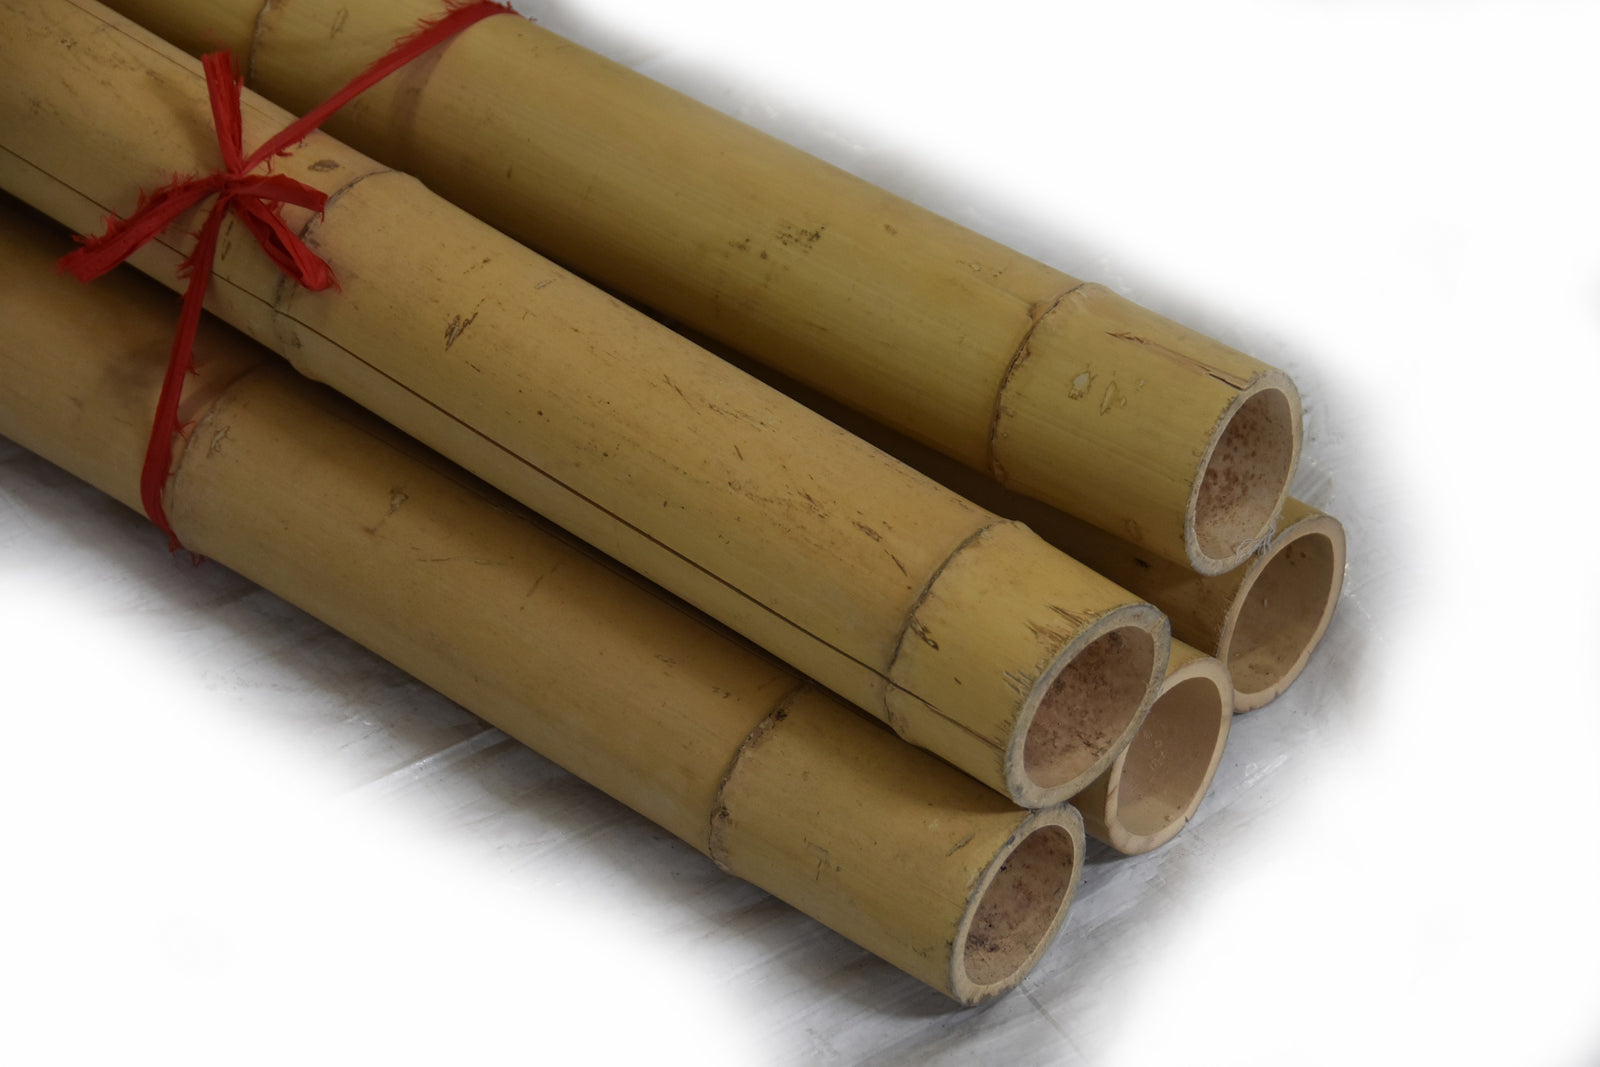 Large Black Bamboo Poles - 1, 2, or 3 Inch - 6' or 8' - Pack of 10 or Pack  of 20 - Decorate With Bamboo